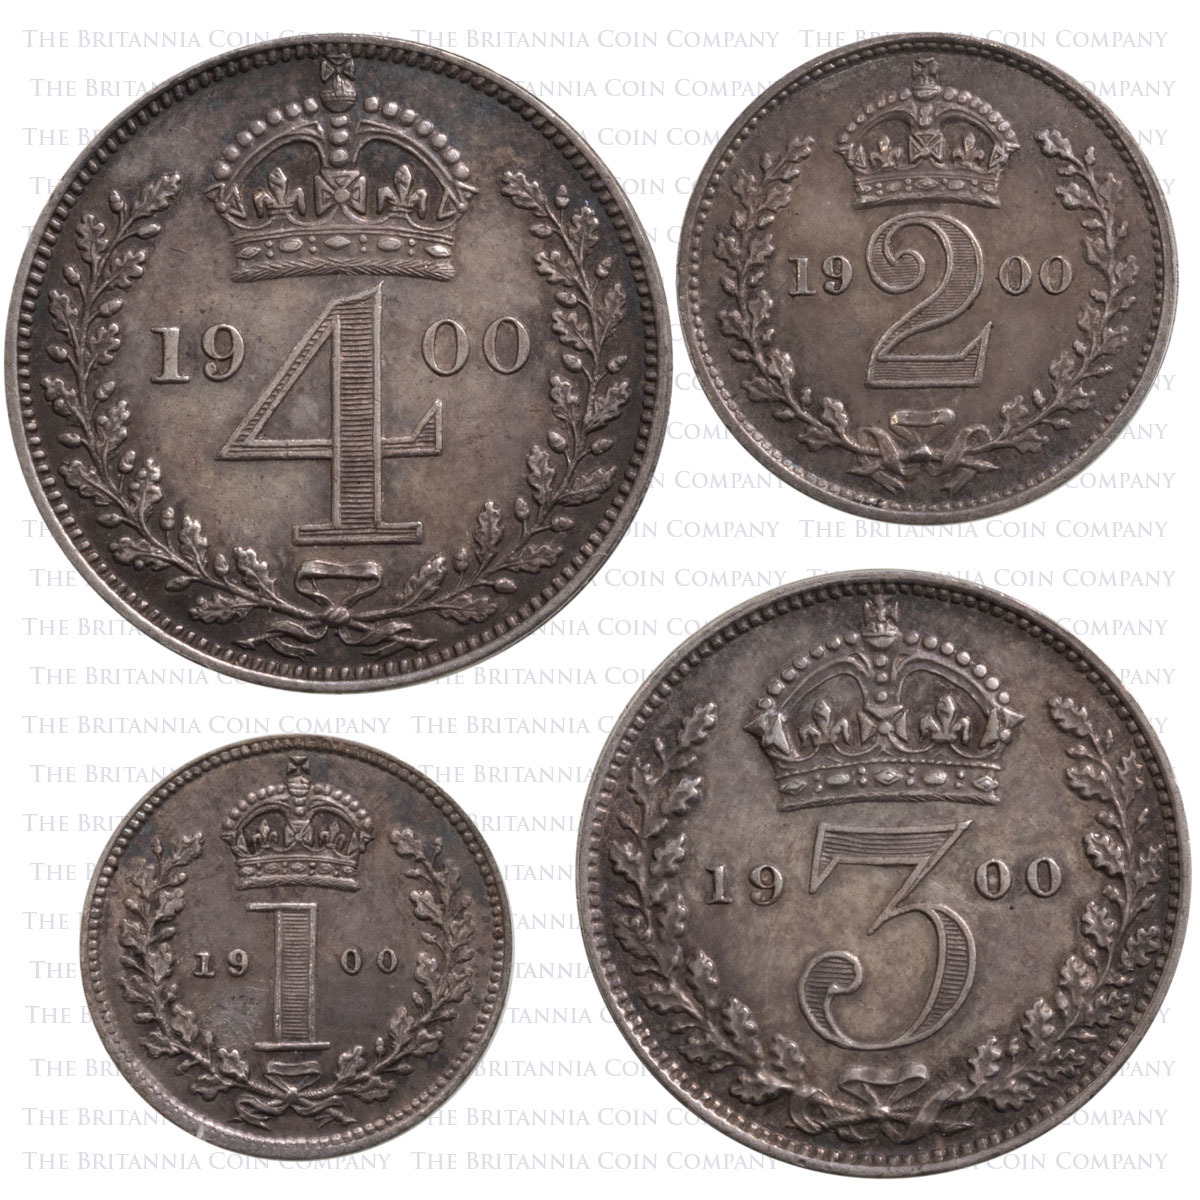 The relative size of Royal Maundy: Maundy coins dated 1900, late in the reign of Queen Victoria, show Jean Baptiste Merlen's classic crown and oak wreath design.